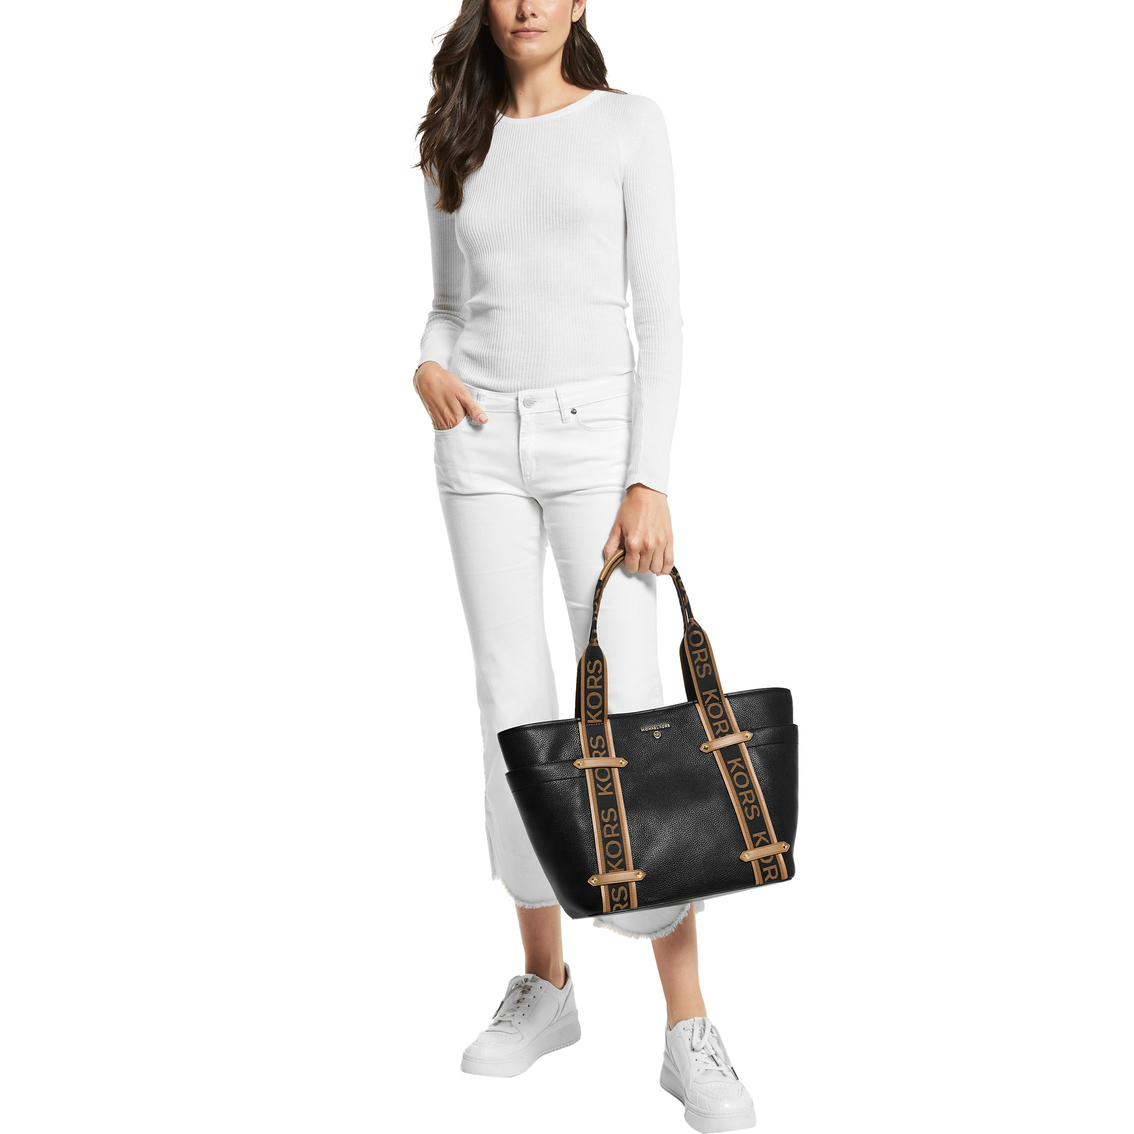 Michael Kors Maeve Large Open Tote | Totes & Shoppers | Clothing ...